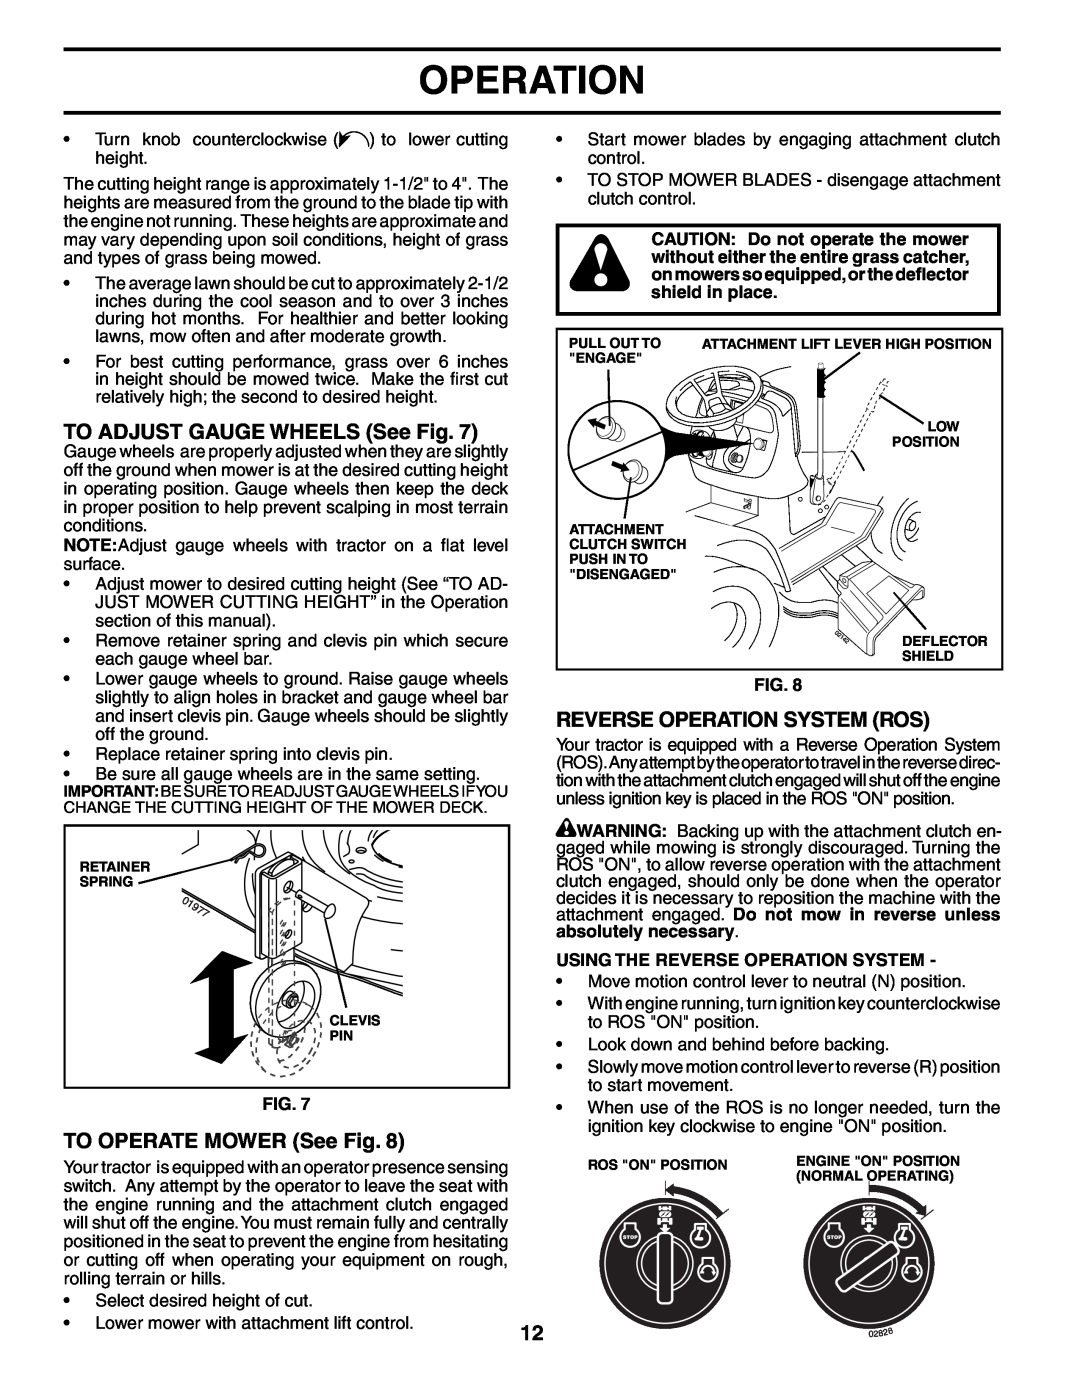 Poulan PD24PH48ST manual TO ADJUST GAUGE WHEELS See Fig, TO OPERATE MOWER See Fig, Reverse Operation System Ros 